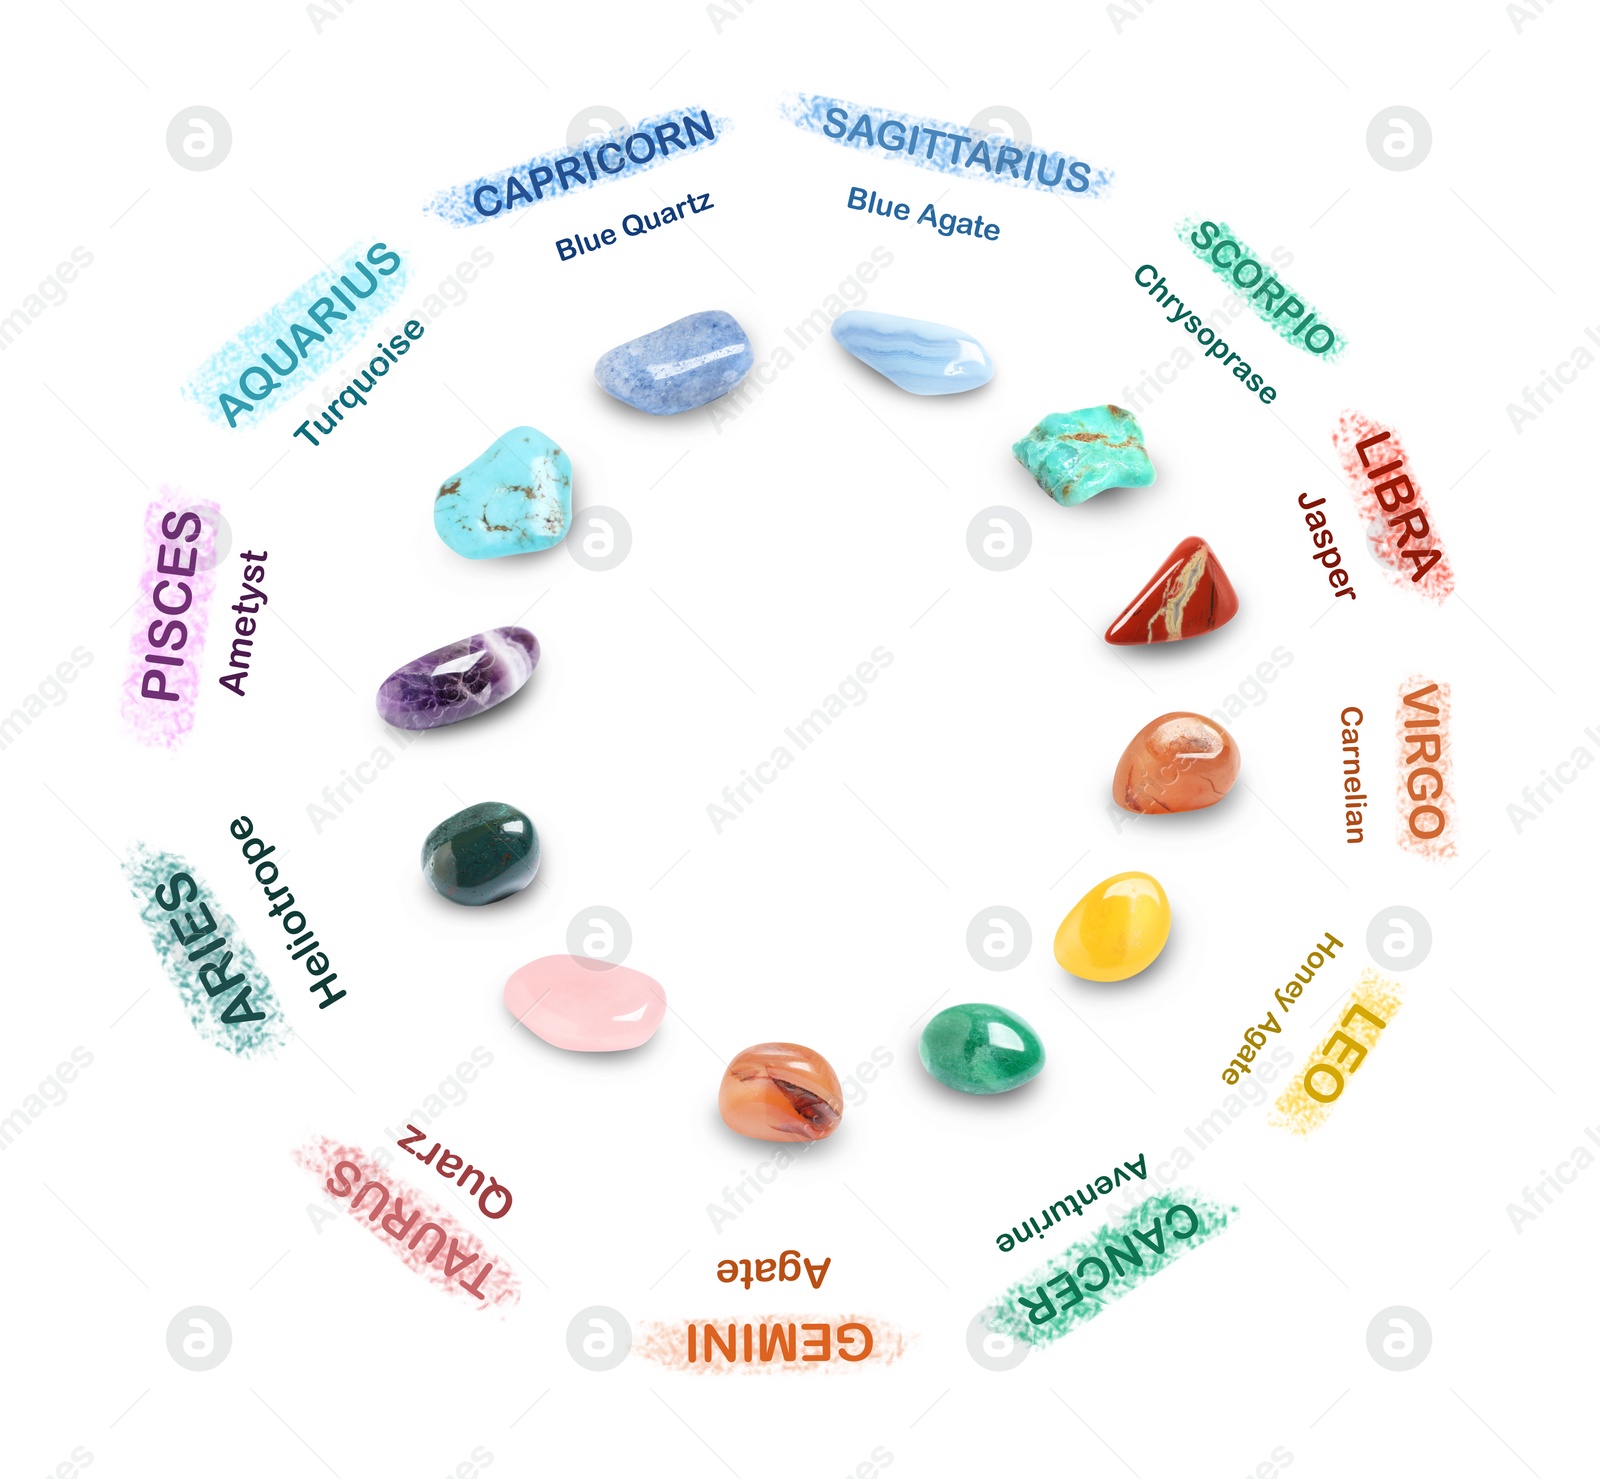 Image of Zodiac signs and their gemstones on white background